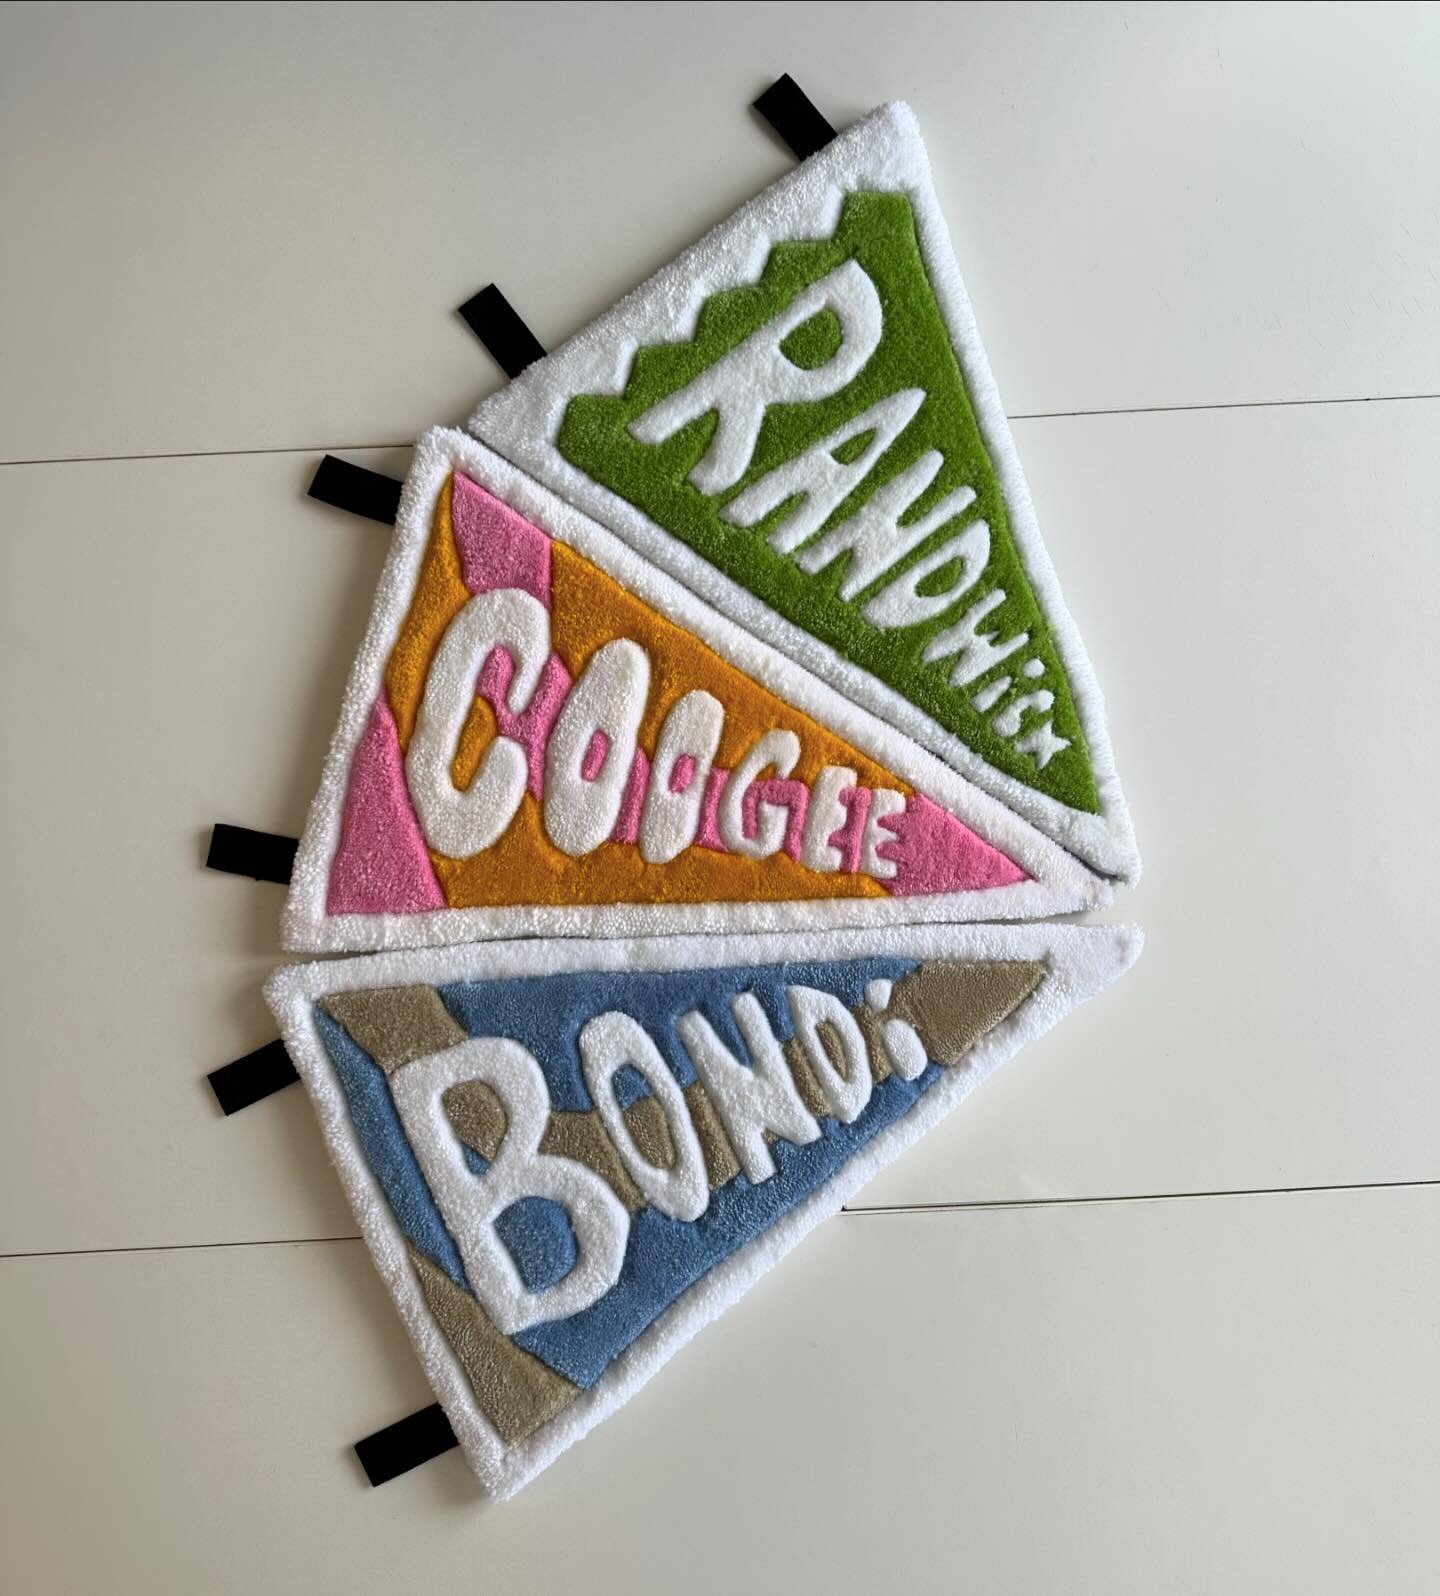 Pennant wall hanging rugs! 🚩

I&rsquo;ve wanted to hand make pennants for years, my room is covered in them hahaha it took me a while to realise I could just rugify some pennants and here we are. 
They are made with stiff felt backing to hold their 